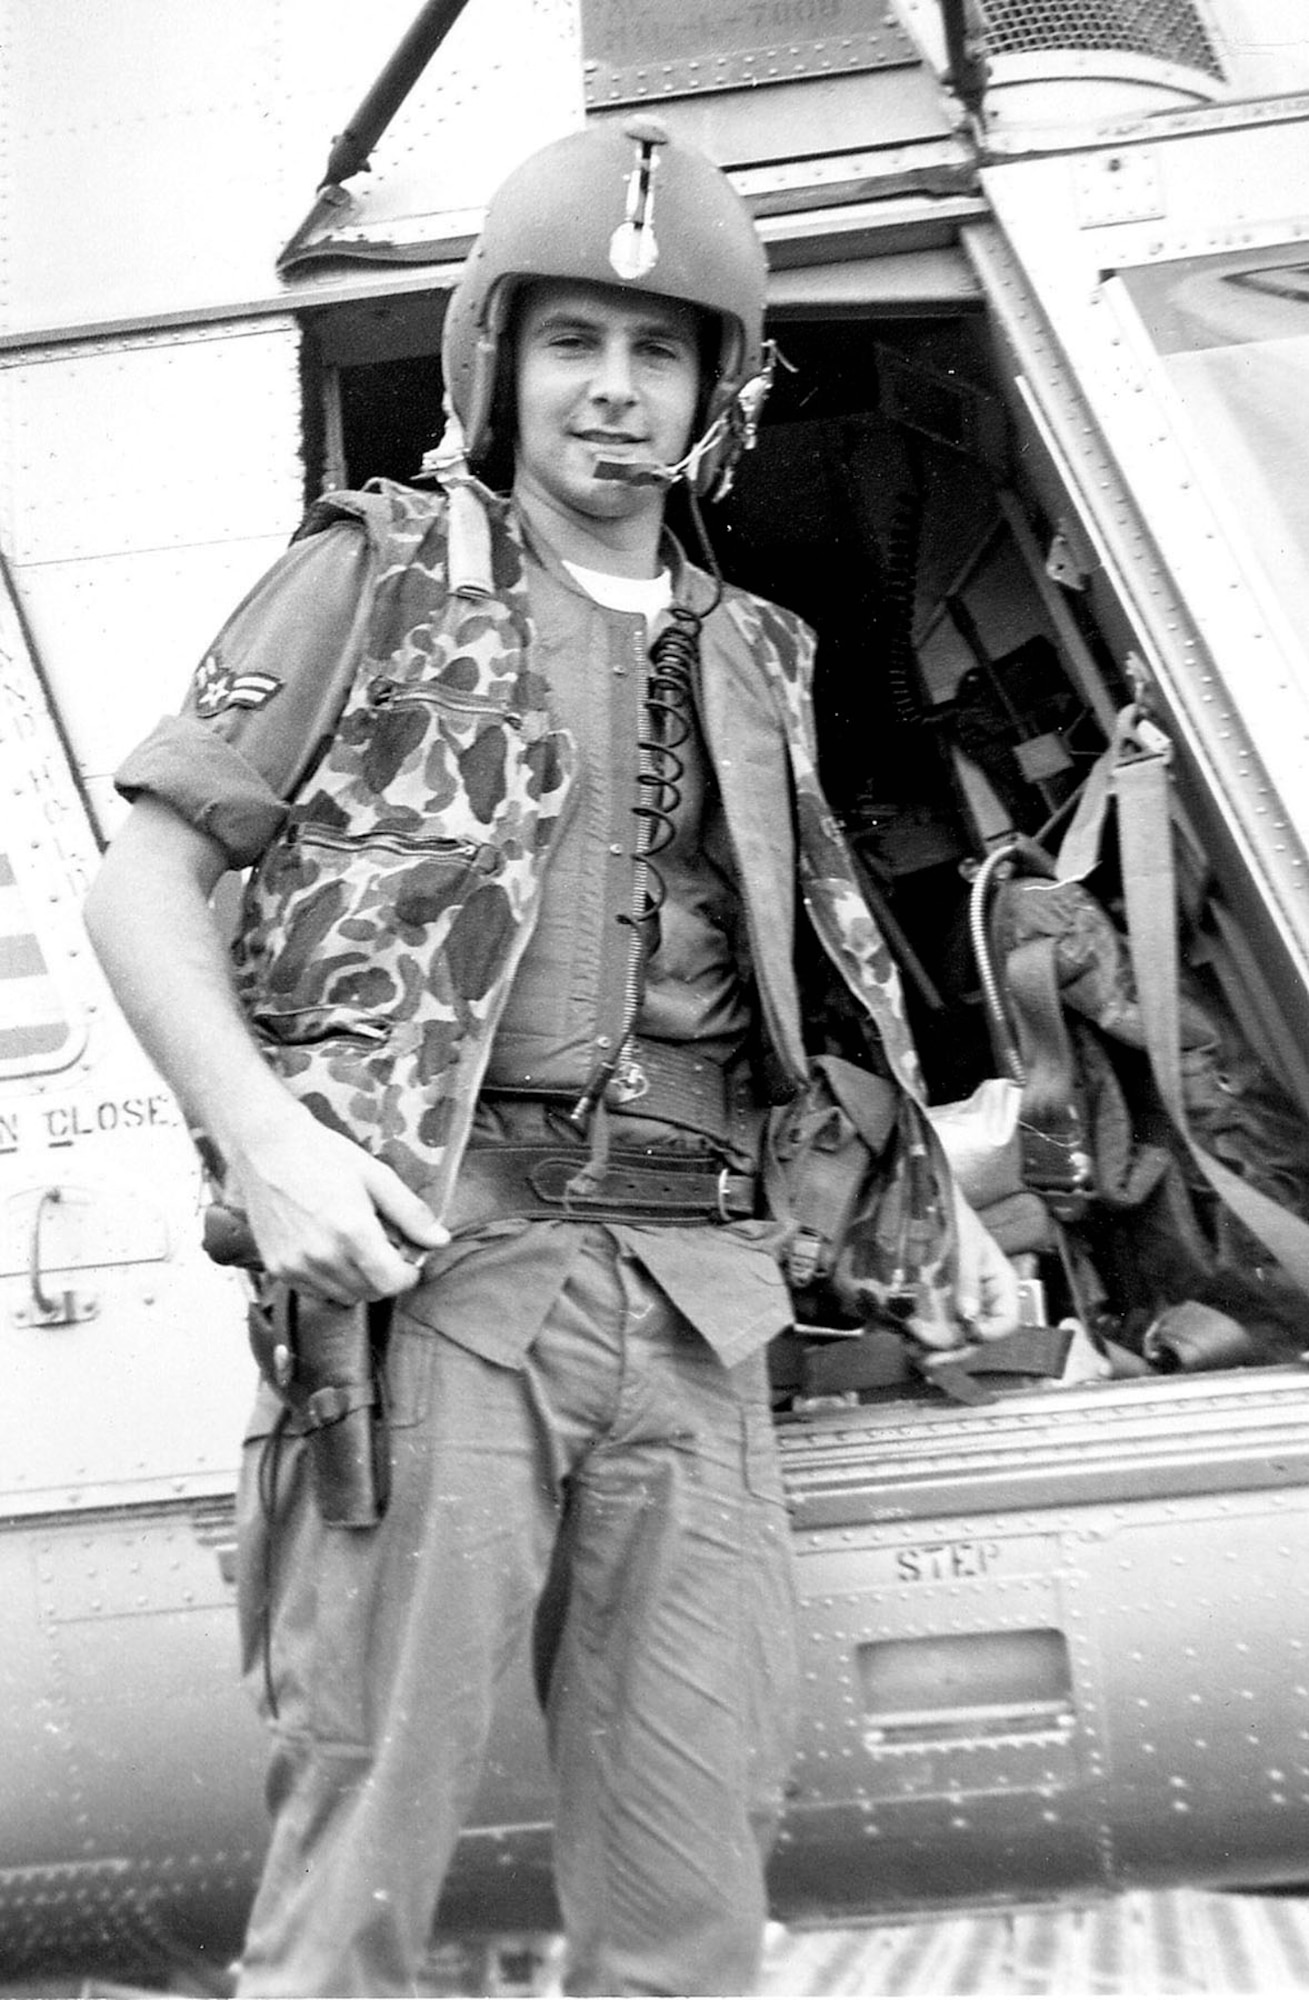 William H. Pitsenbarger was killed in action on April 11, 1966, while defending his post and wounded troops. He was posthumously awarded the Medal of Honor and the Air Force Cross. (U.S. Air Force file photo)